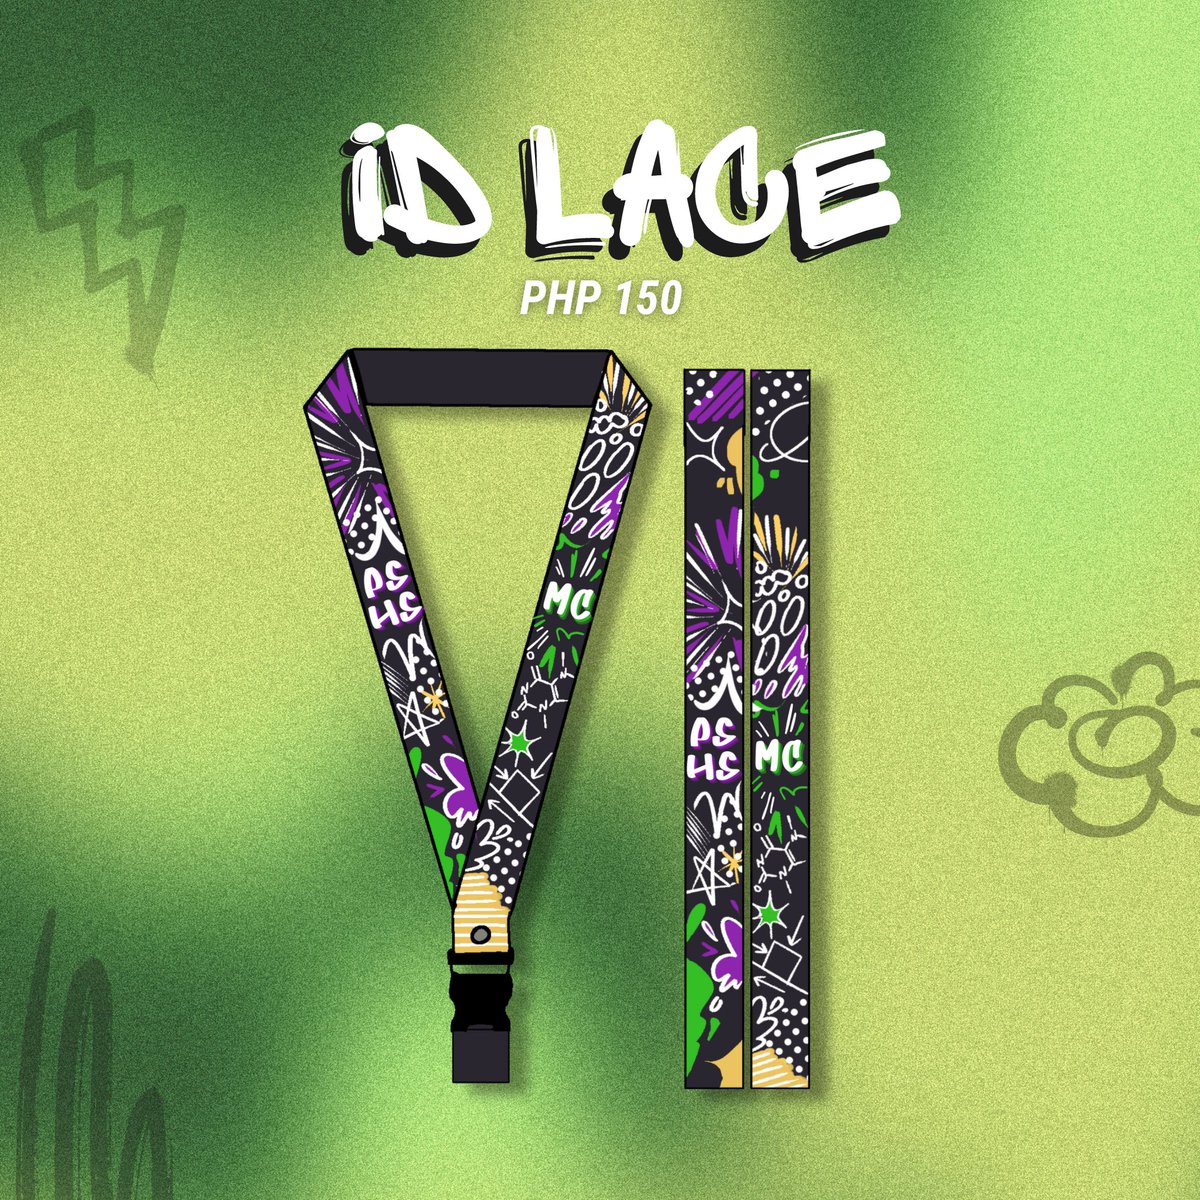 Uniforms need an extra boost? 🚀

Our lanyard design would surely catch everyone’s eye 👁️ 

Hurry and pick your lanyard up to run your daily missions in style 🤫😎